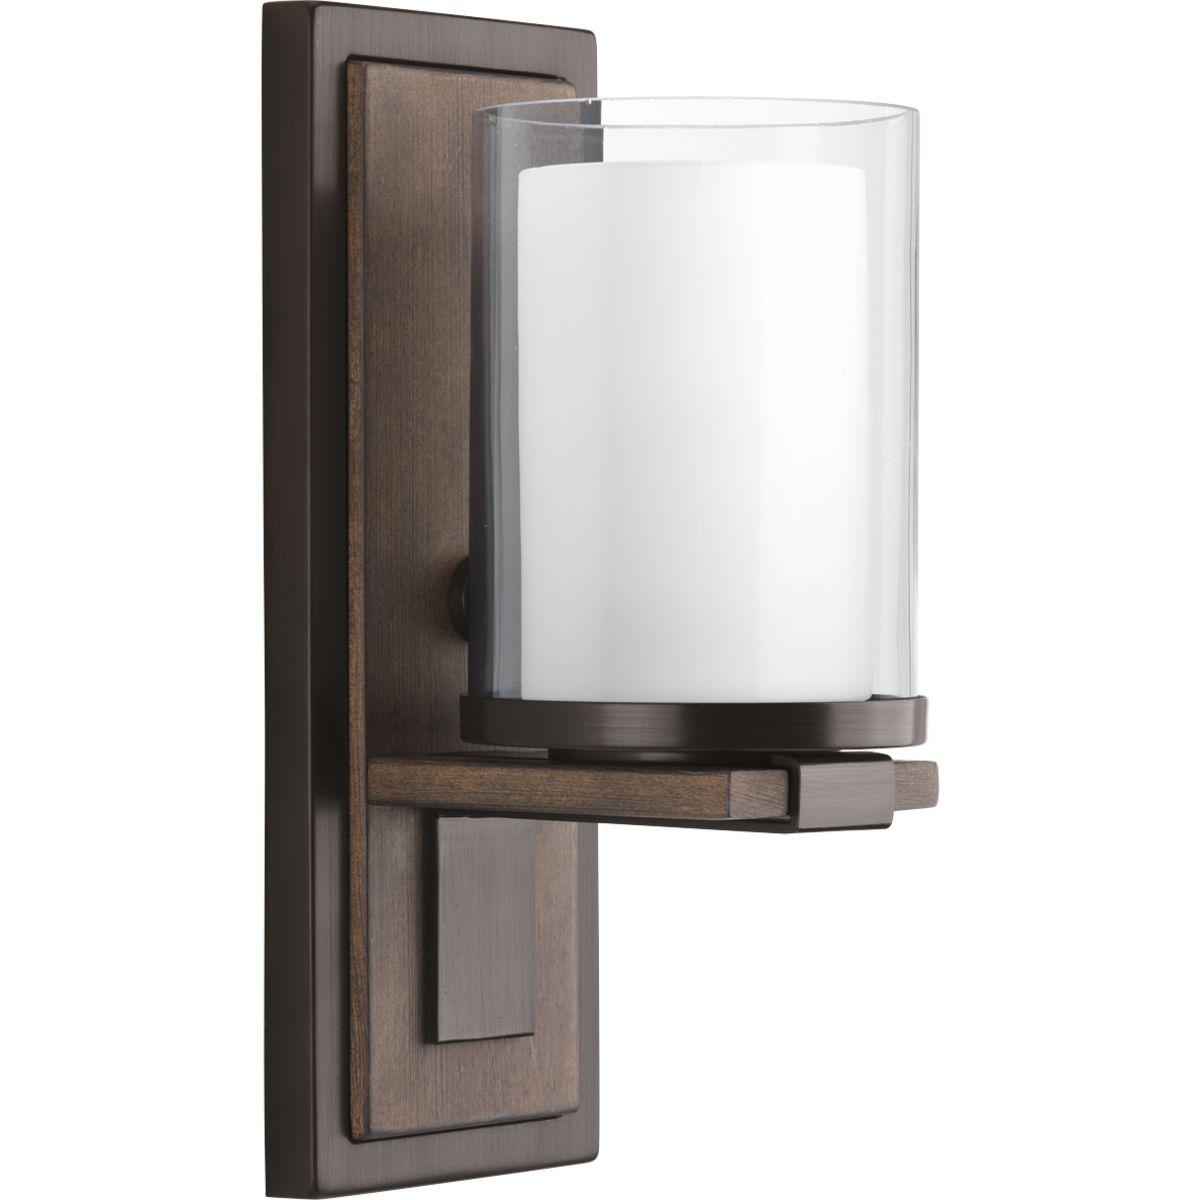 Hubbell P710015-020 Mast has a zen-like modernism that blends the warmth of a faux-finish wooden backplate with a clean, modern pediment supporting a double-glass diffuser. The combination of clear and etched glass recreates the appearance of a votive candleholder to enhance